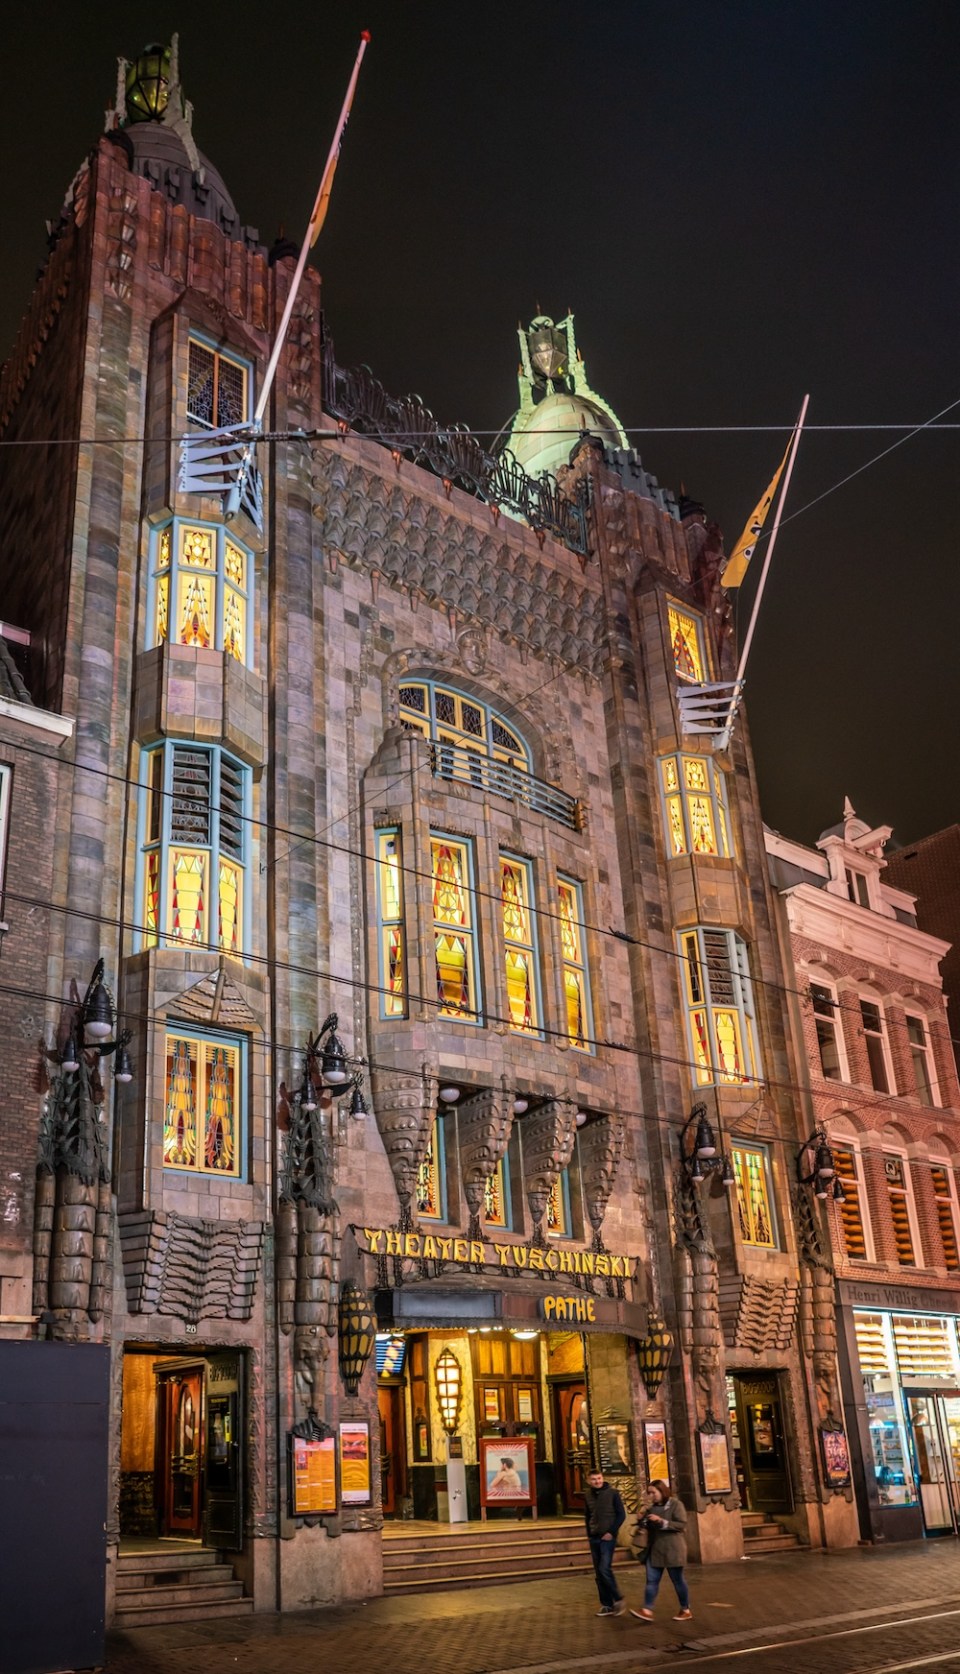 Amsterdam May 18 2018 - Night view of the front of the famous ciname Tuschinski. located at the Reguliersbreestraat near the Rembrandtplein